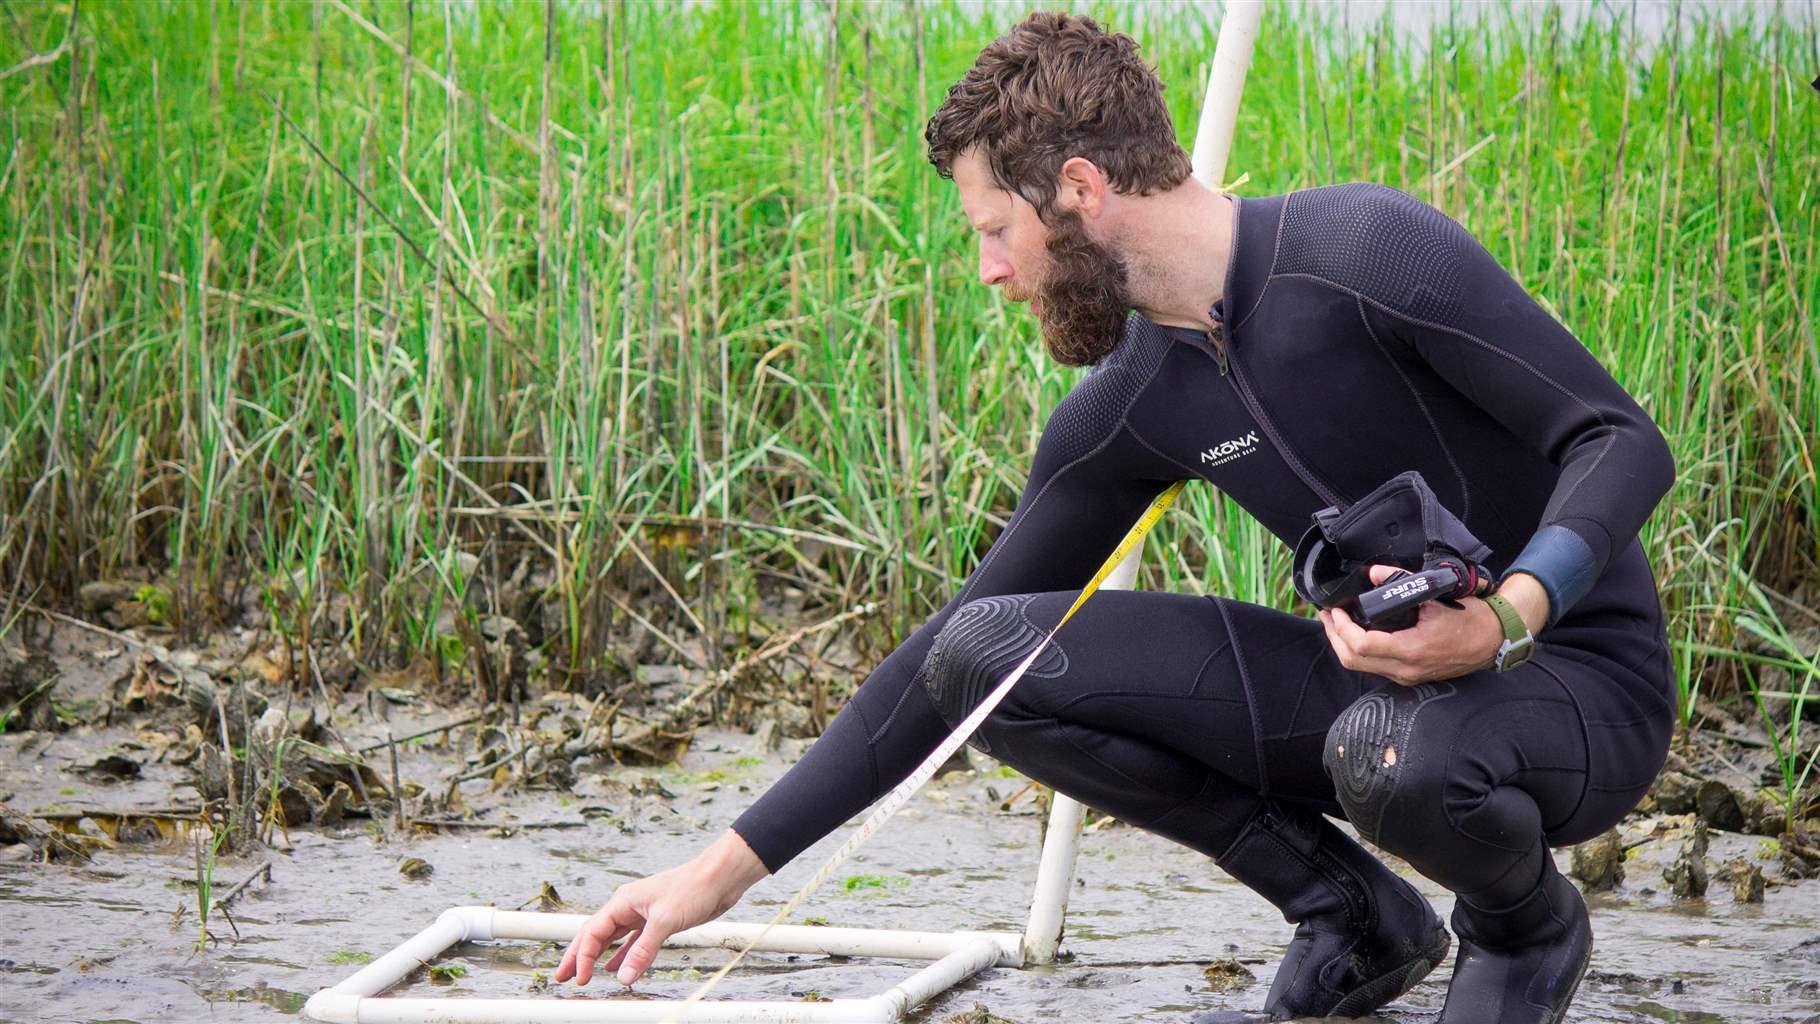 A man with a full beard and dressed in a wetsuit crouches beside wetland grasses to place a white plastic frame in the mud, as part of seagrass research.